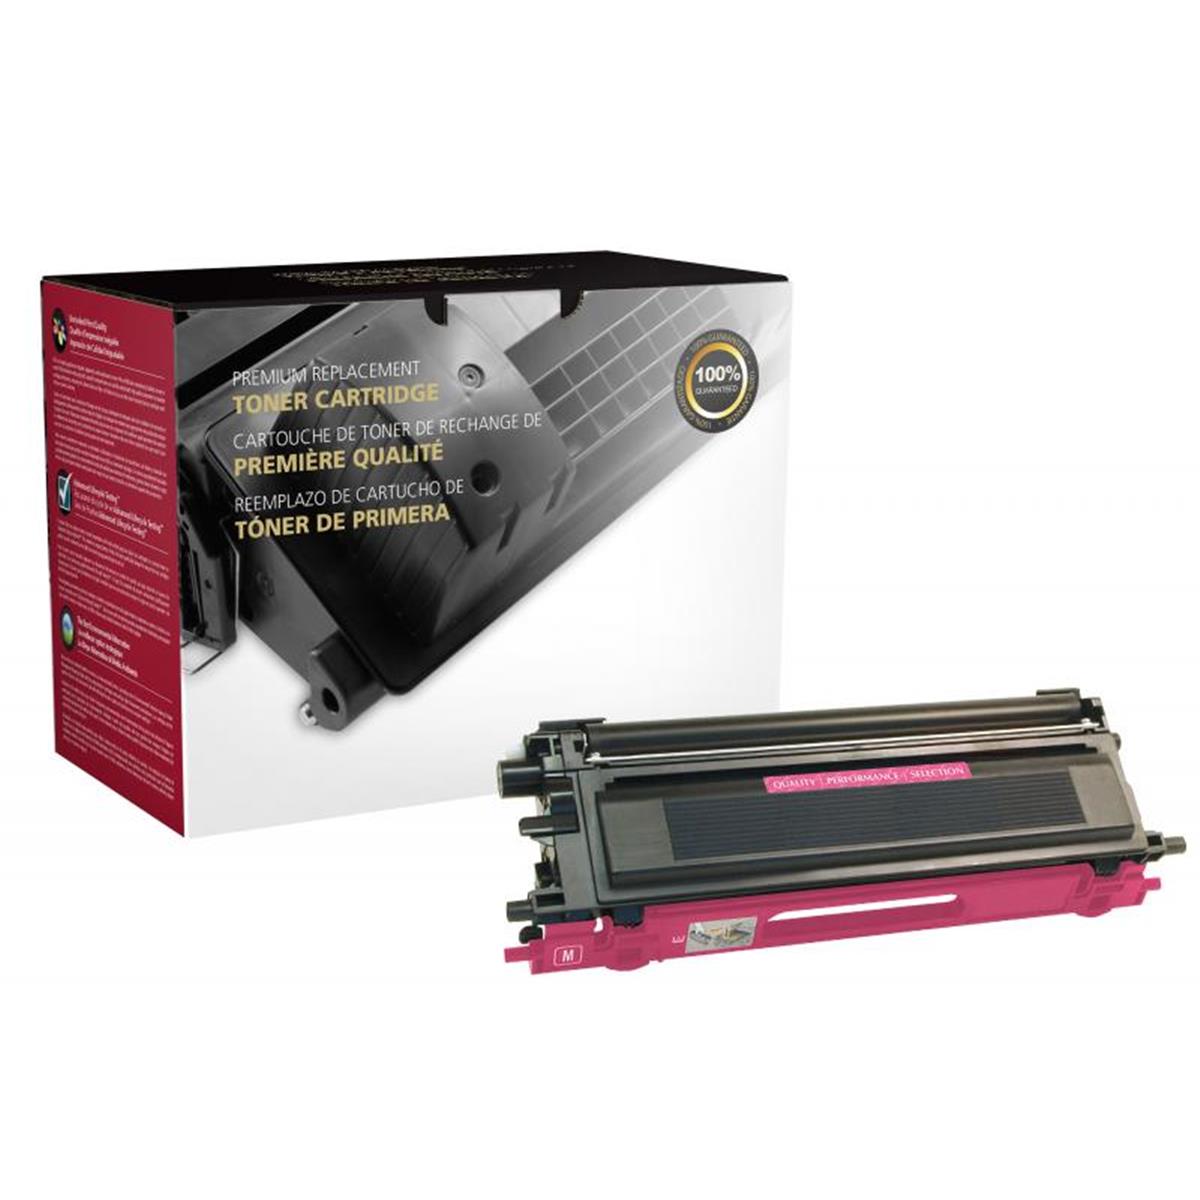 Picture of Brother 200495 Magenta Toner Cartridge for TN110